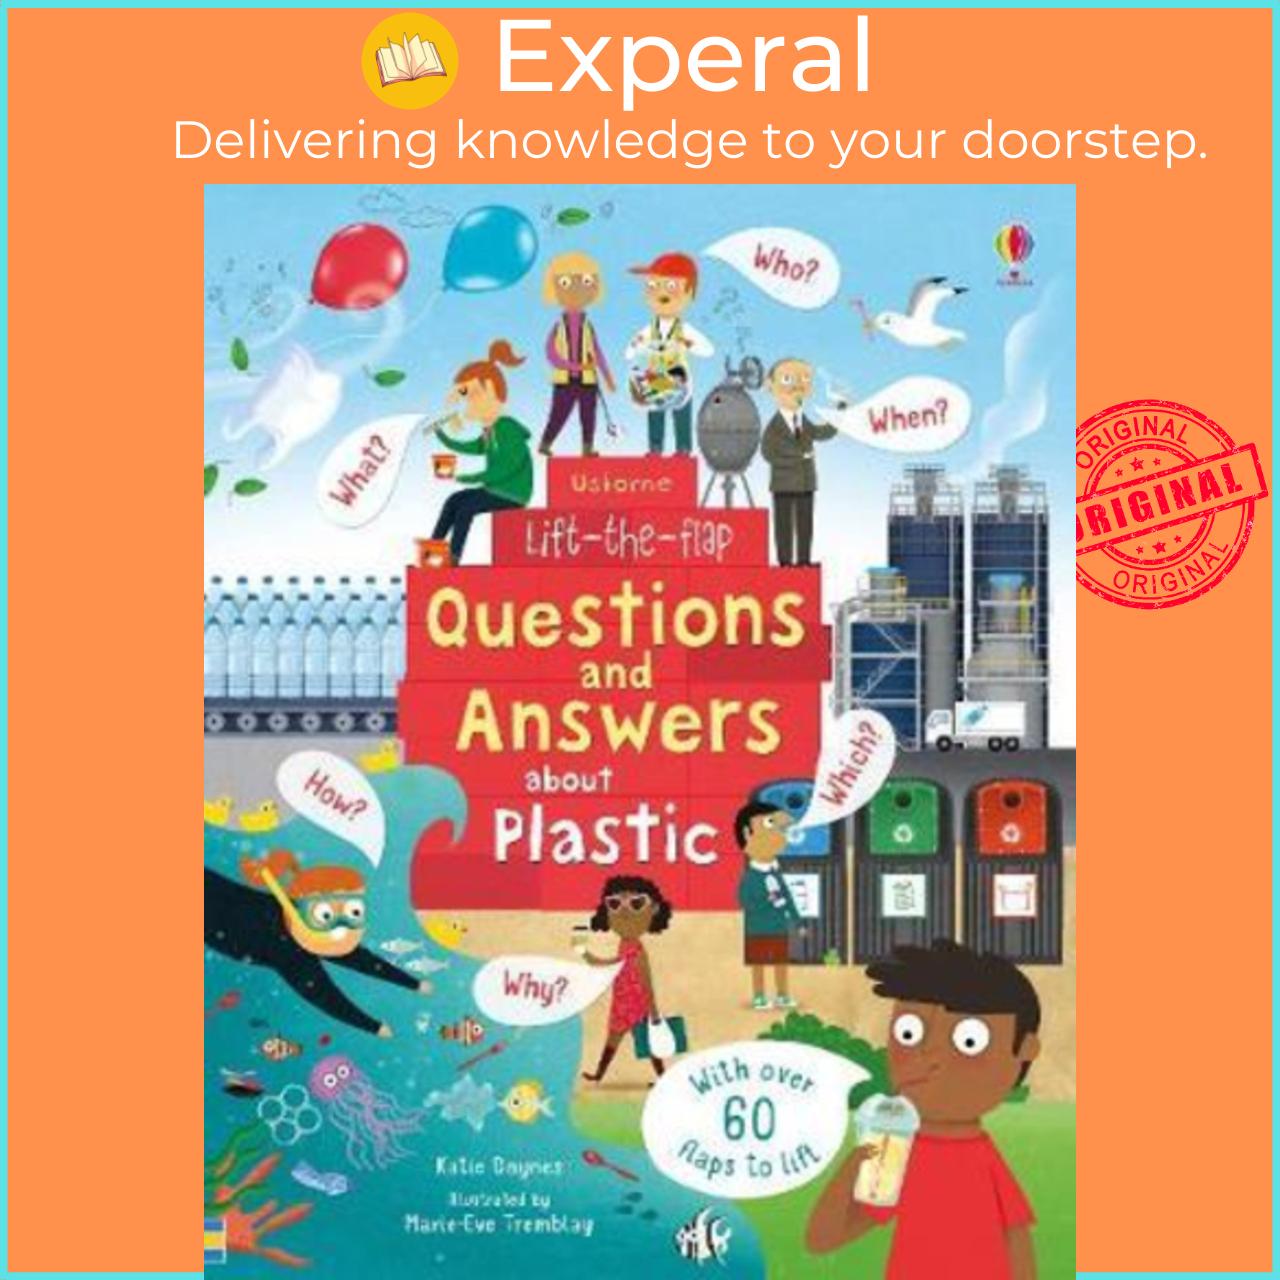 Sách - Lift-the-Flap Questions and Answers About Plastic by Katie Daynes (UK edition, paperback)